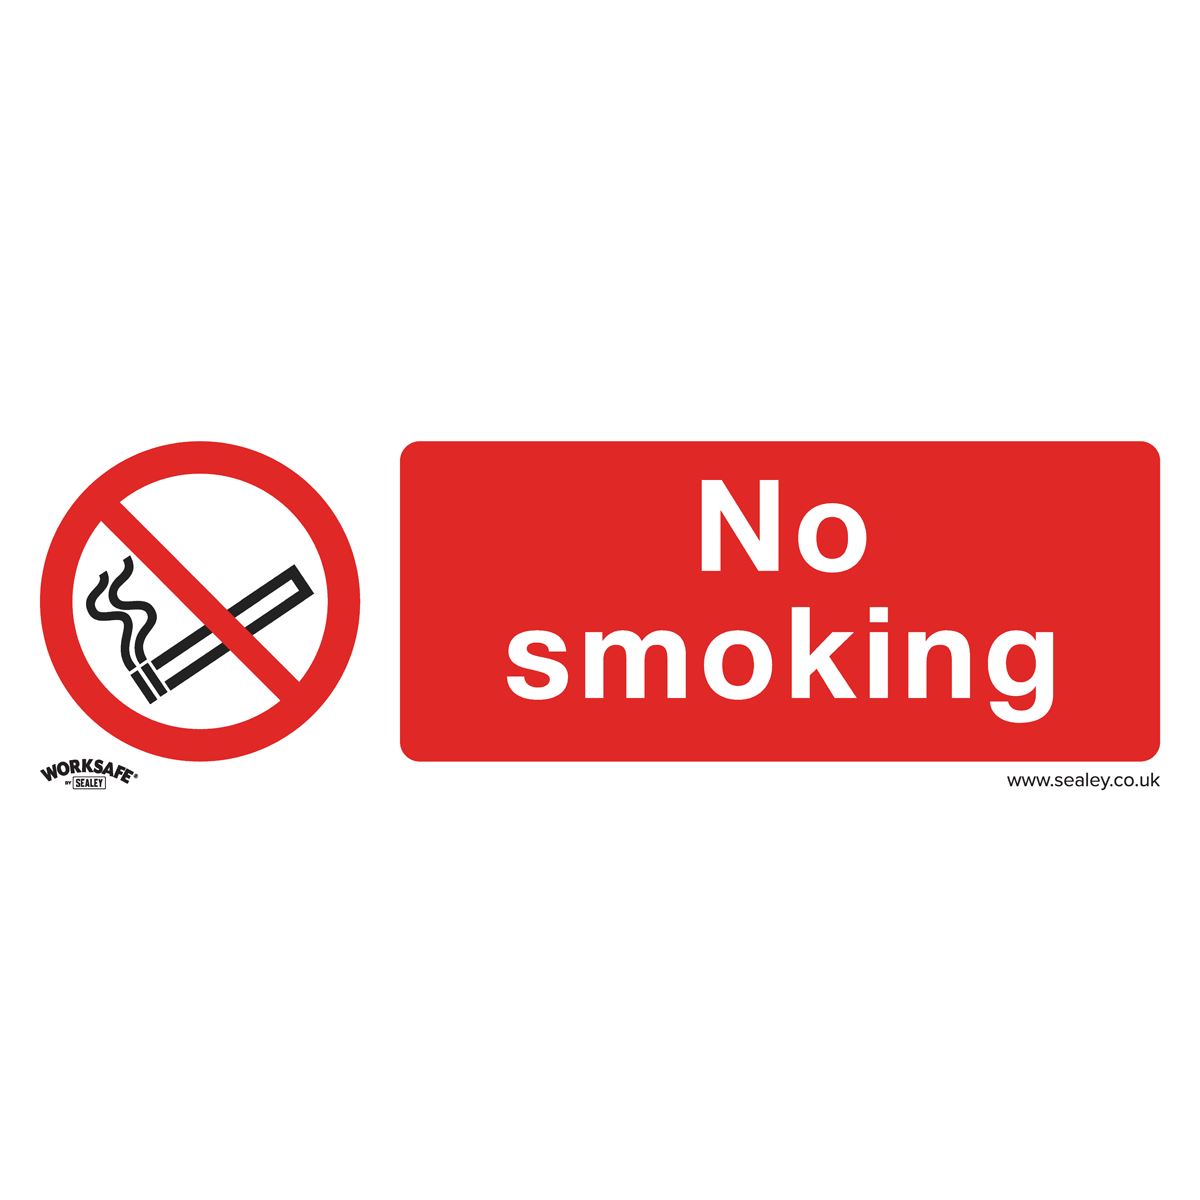 Worksafe by Sealey Prohibition Safety Sign - No Smoking - Rigid Plastic